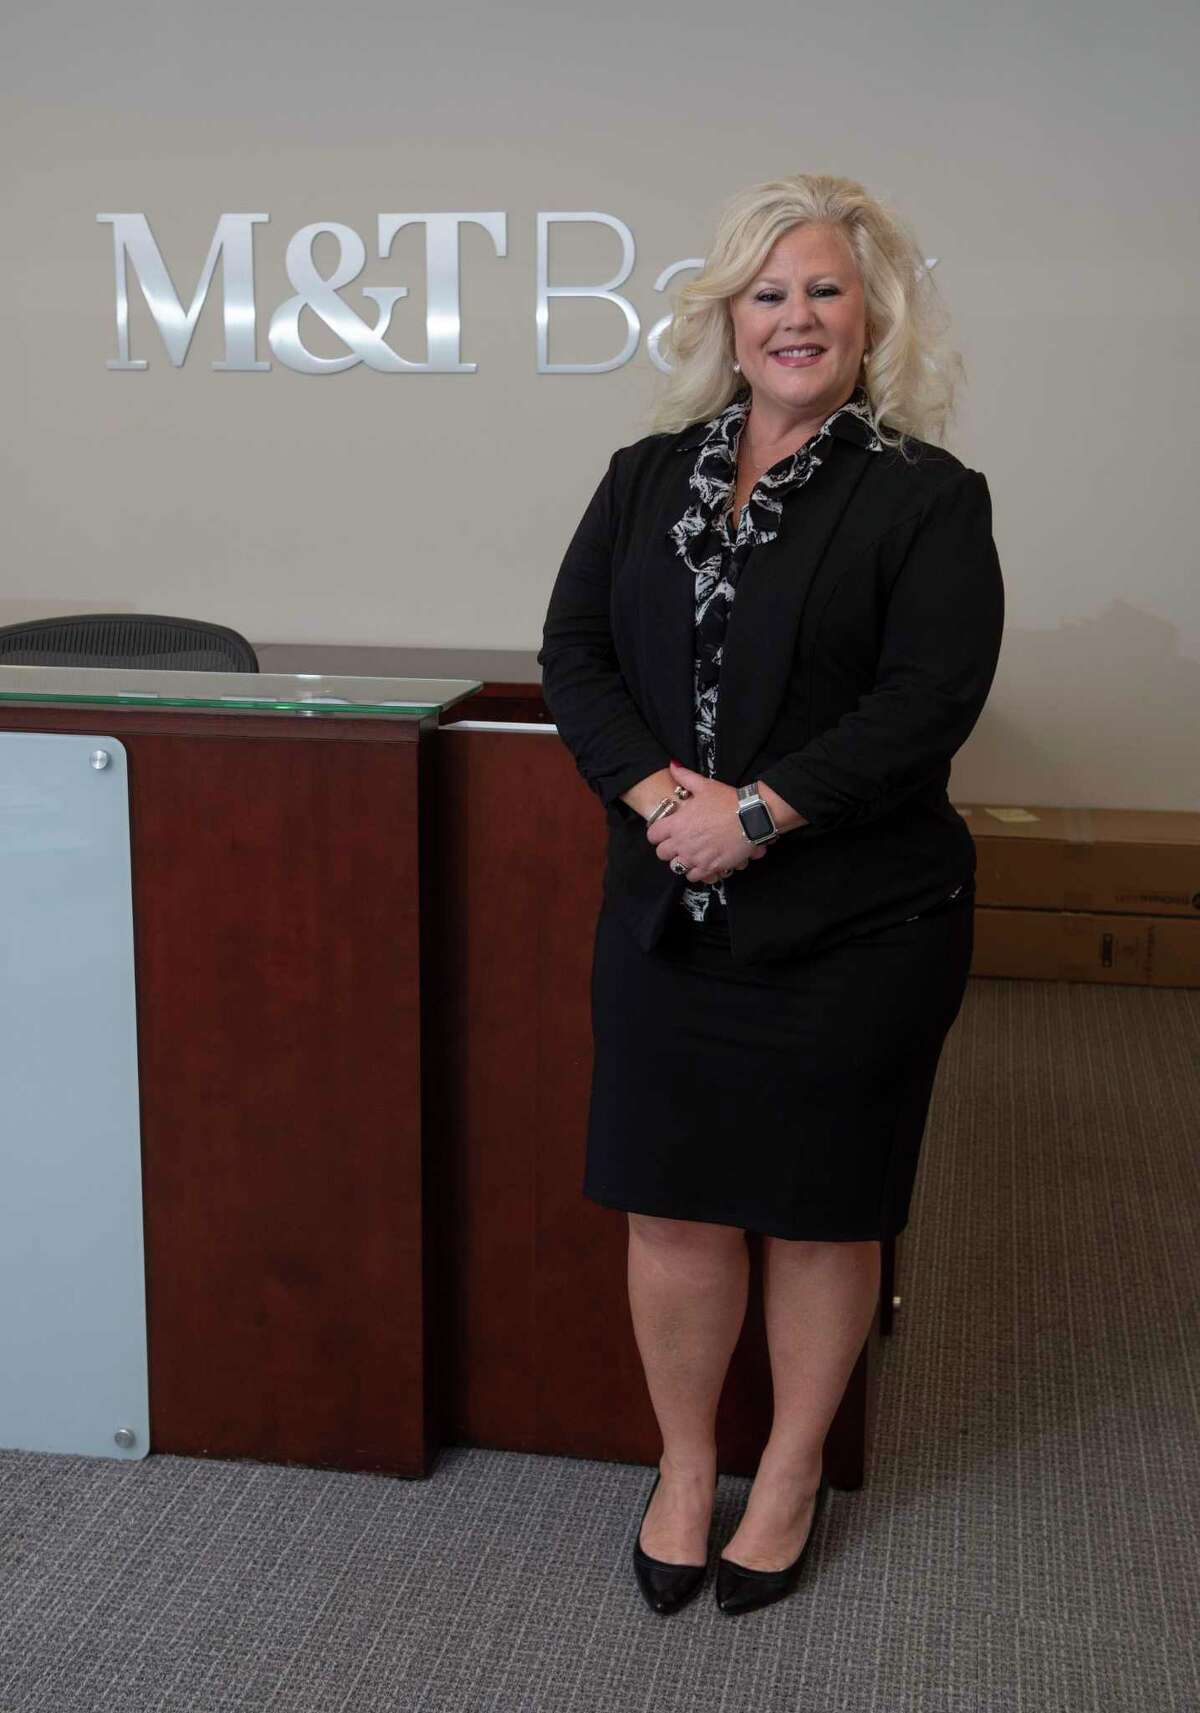 Heather Ford, senior vice president and senior wealth advisor for Wilmington Trust, a branch of M&T Bank, is seen at Wilmington Trust on Wednesday, April 20, 2022 in Albany, N.Y.